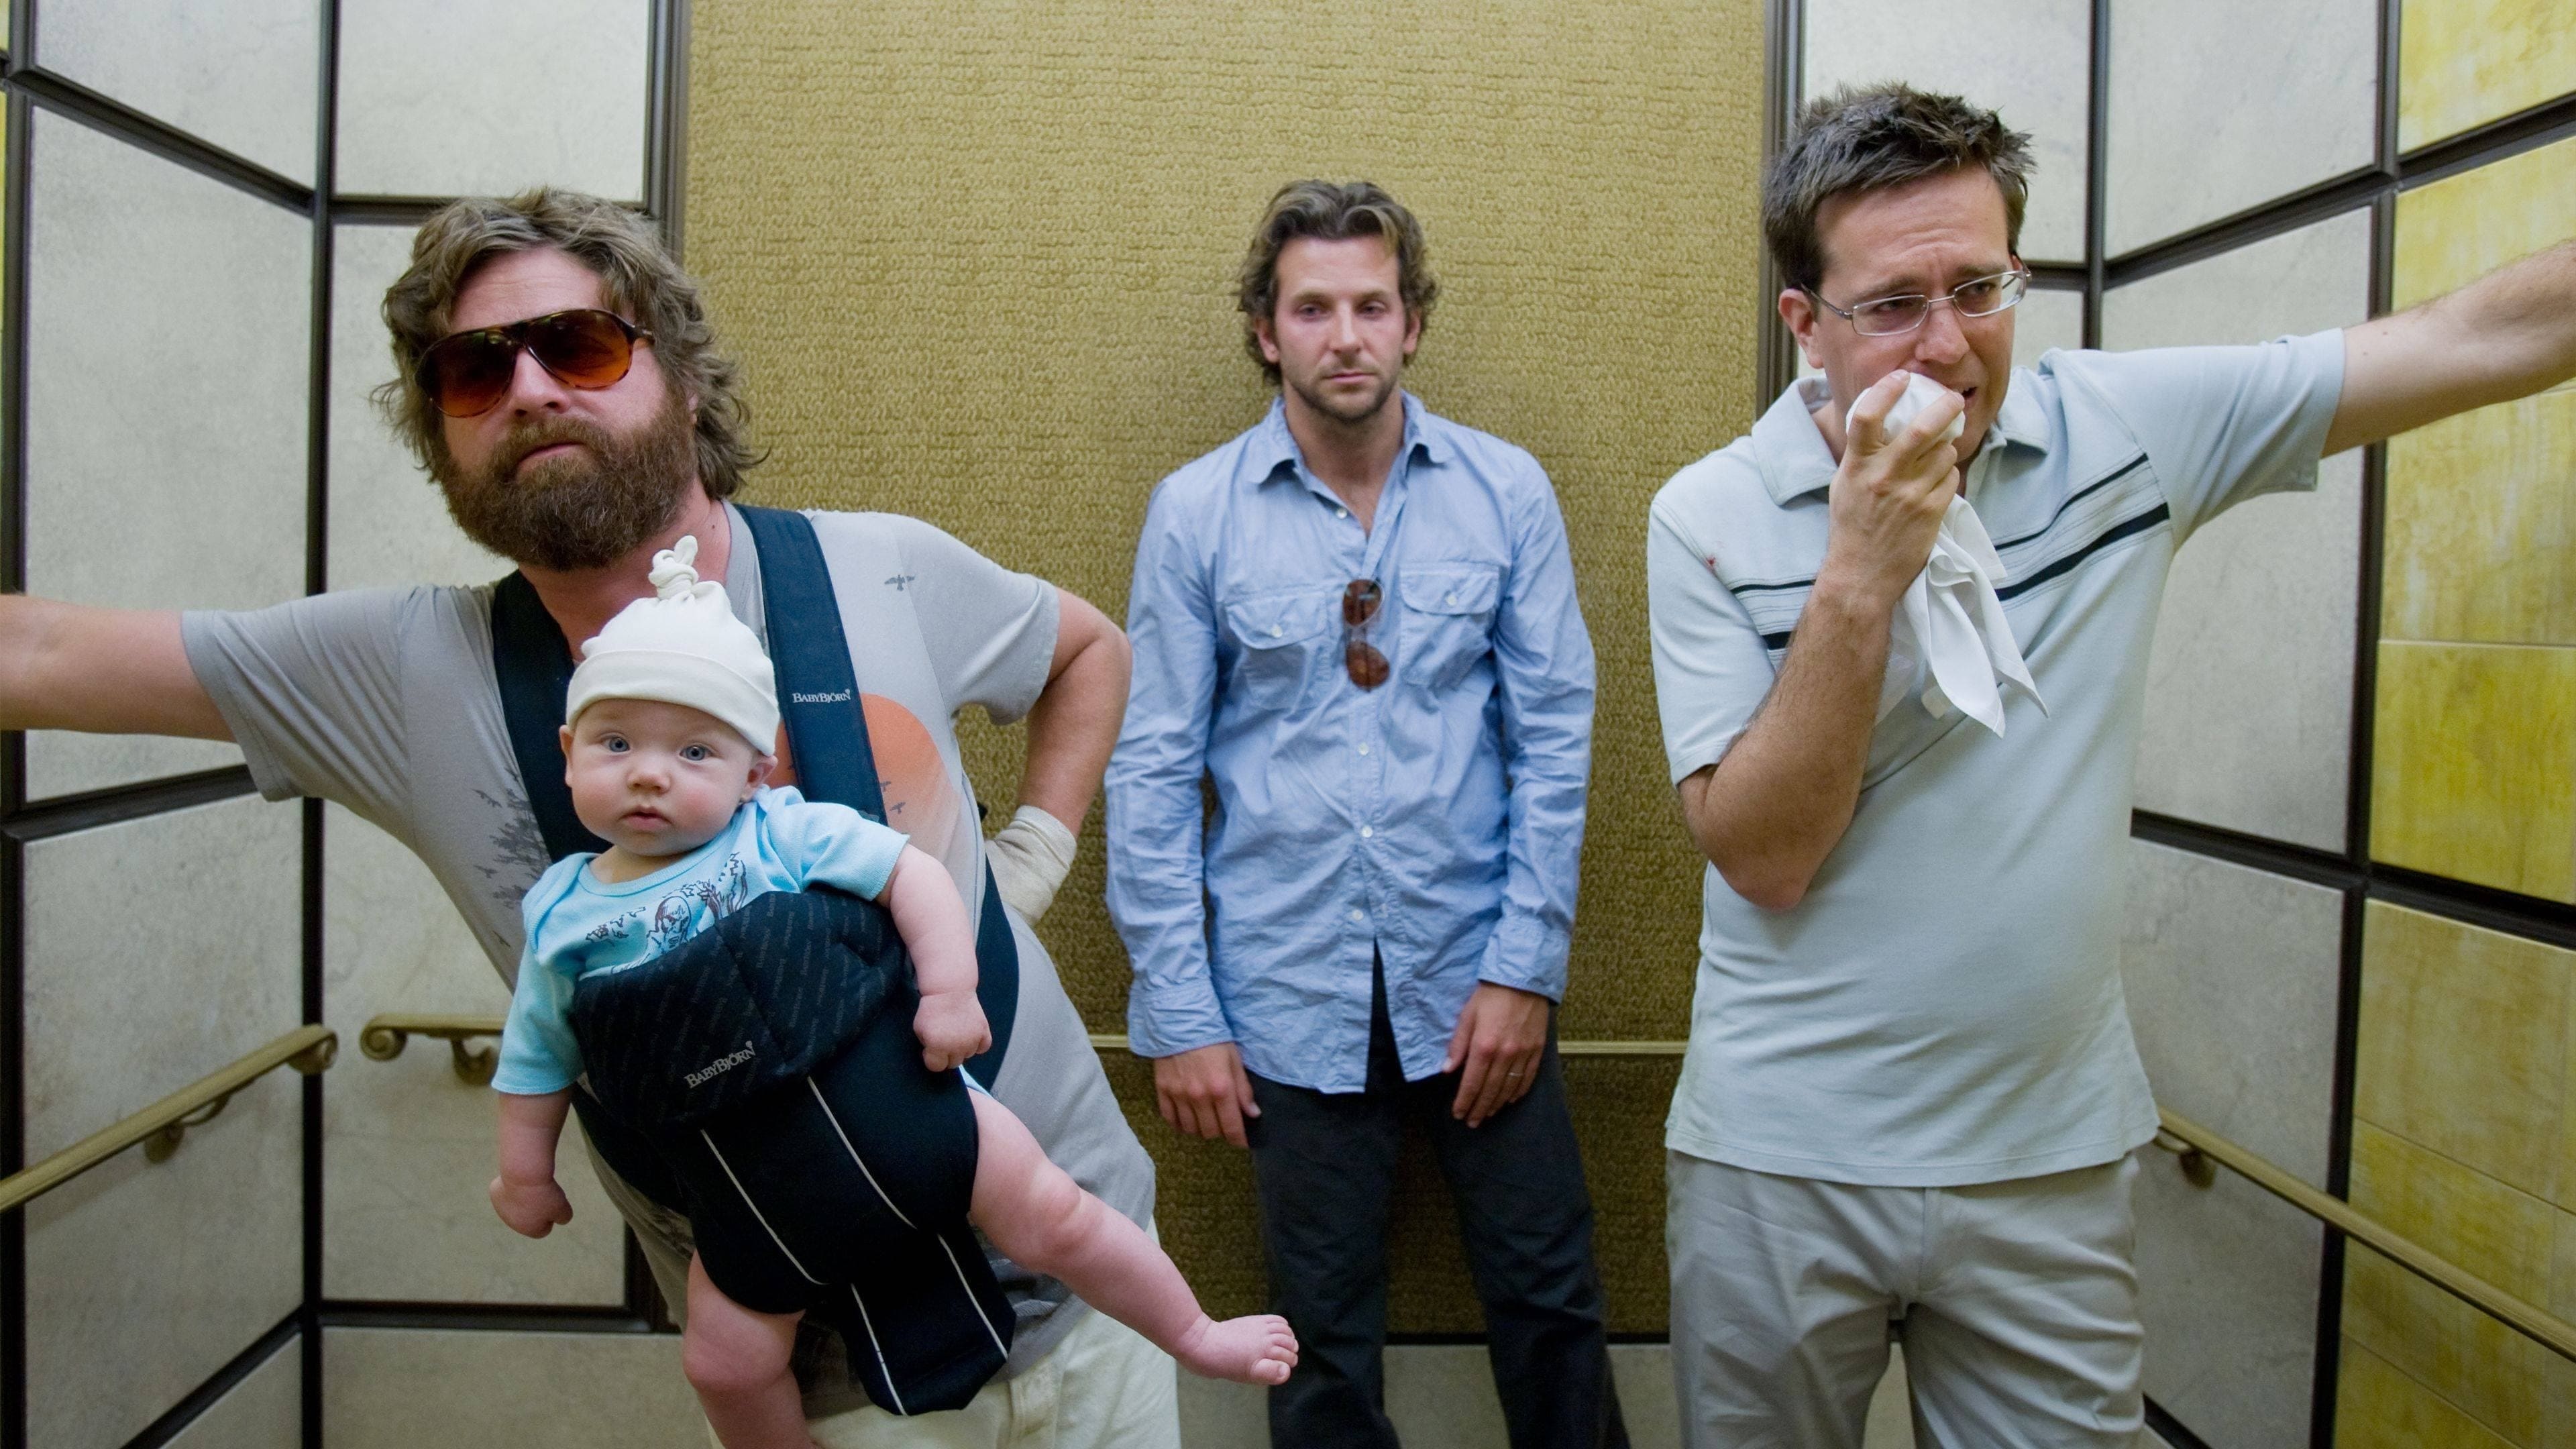 The Hangover 2009 123movies